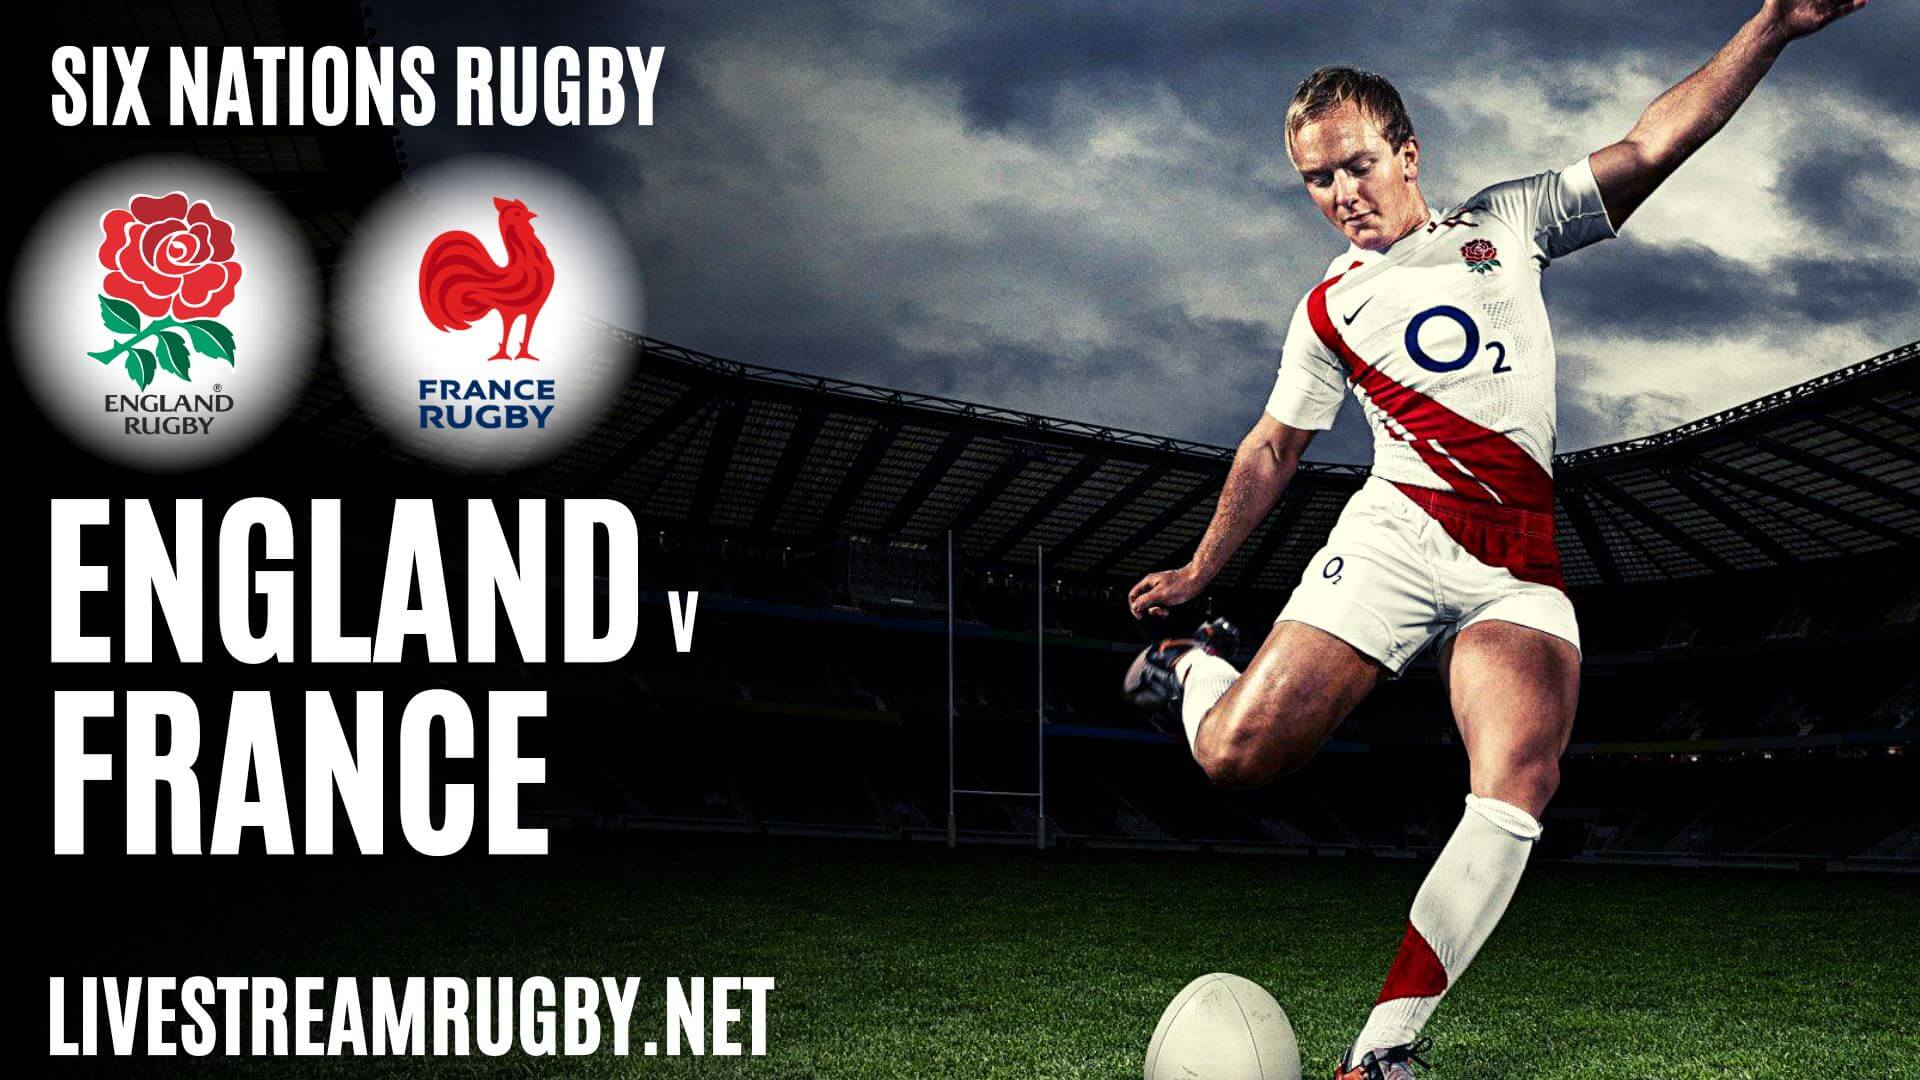 England Vs France Live Stream Six Nations Rugby Online